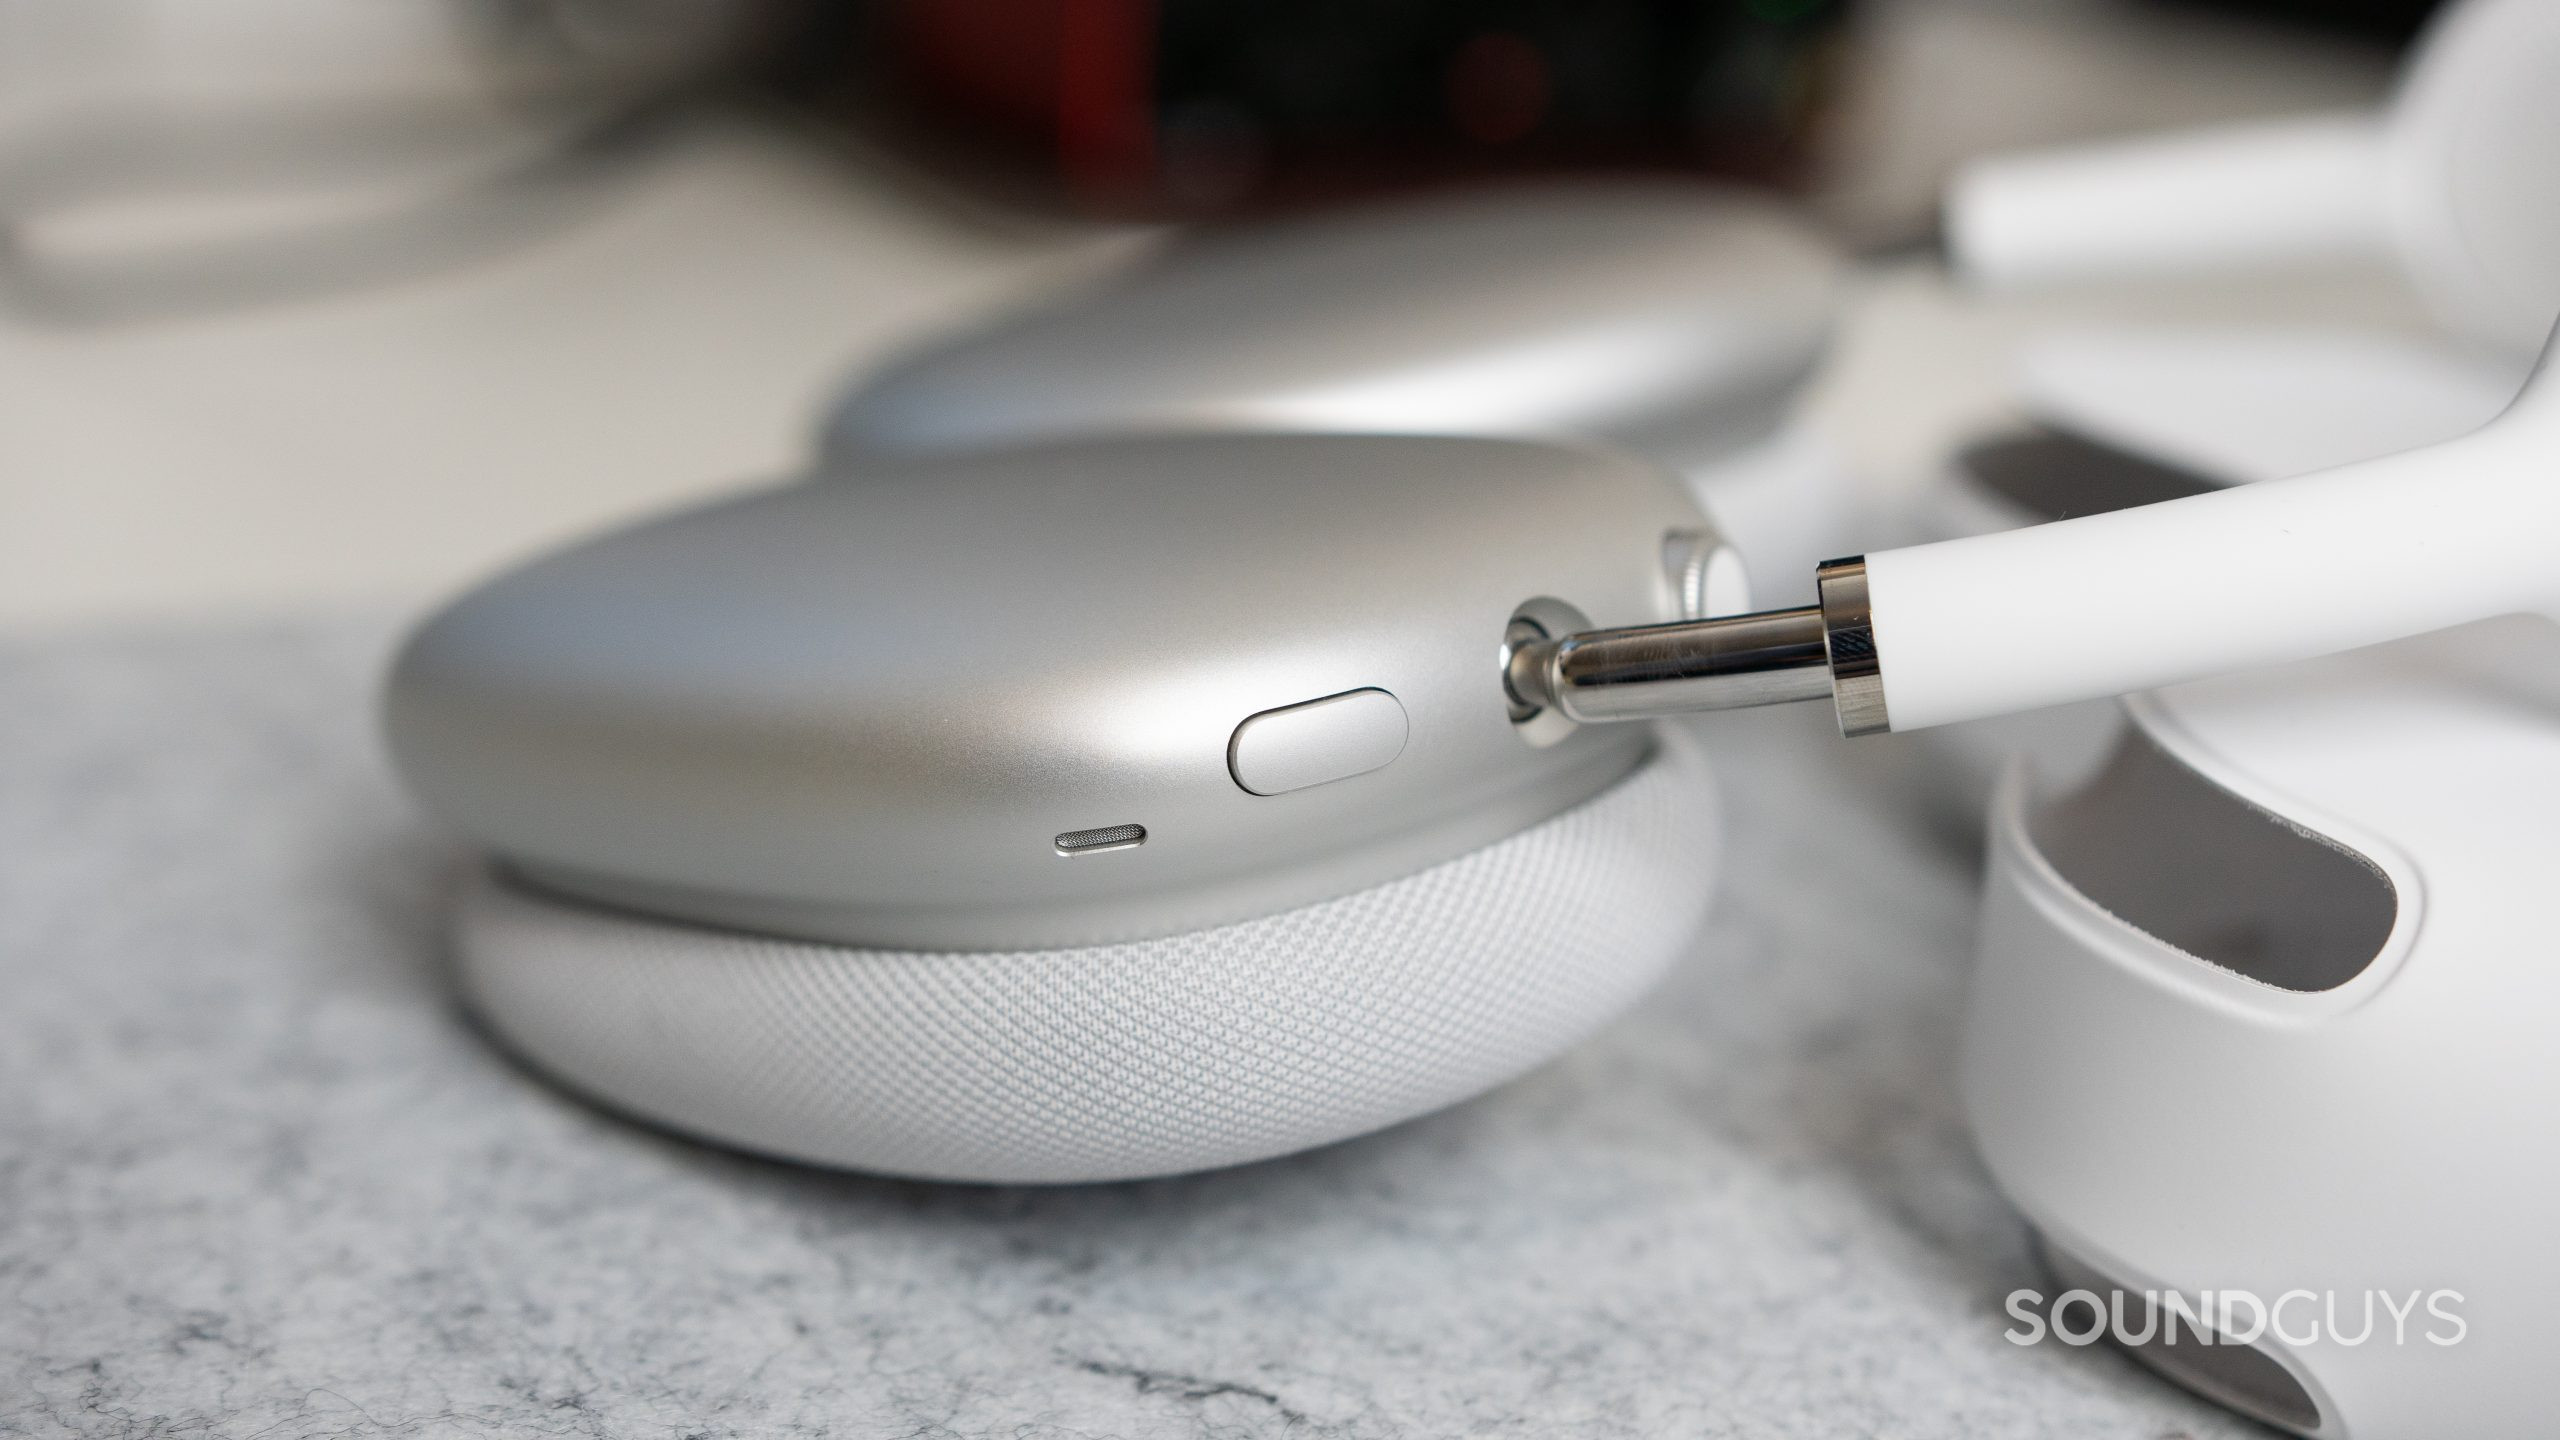 Close-up of the noise canceling toggle on the Apple AirPods Max as it is on a desk.